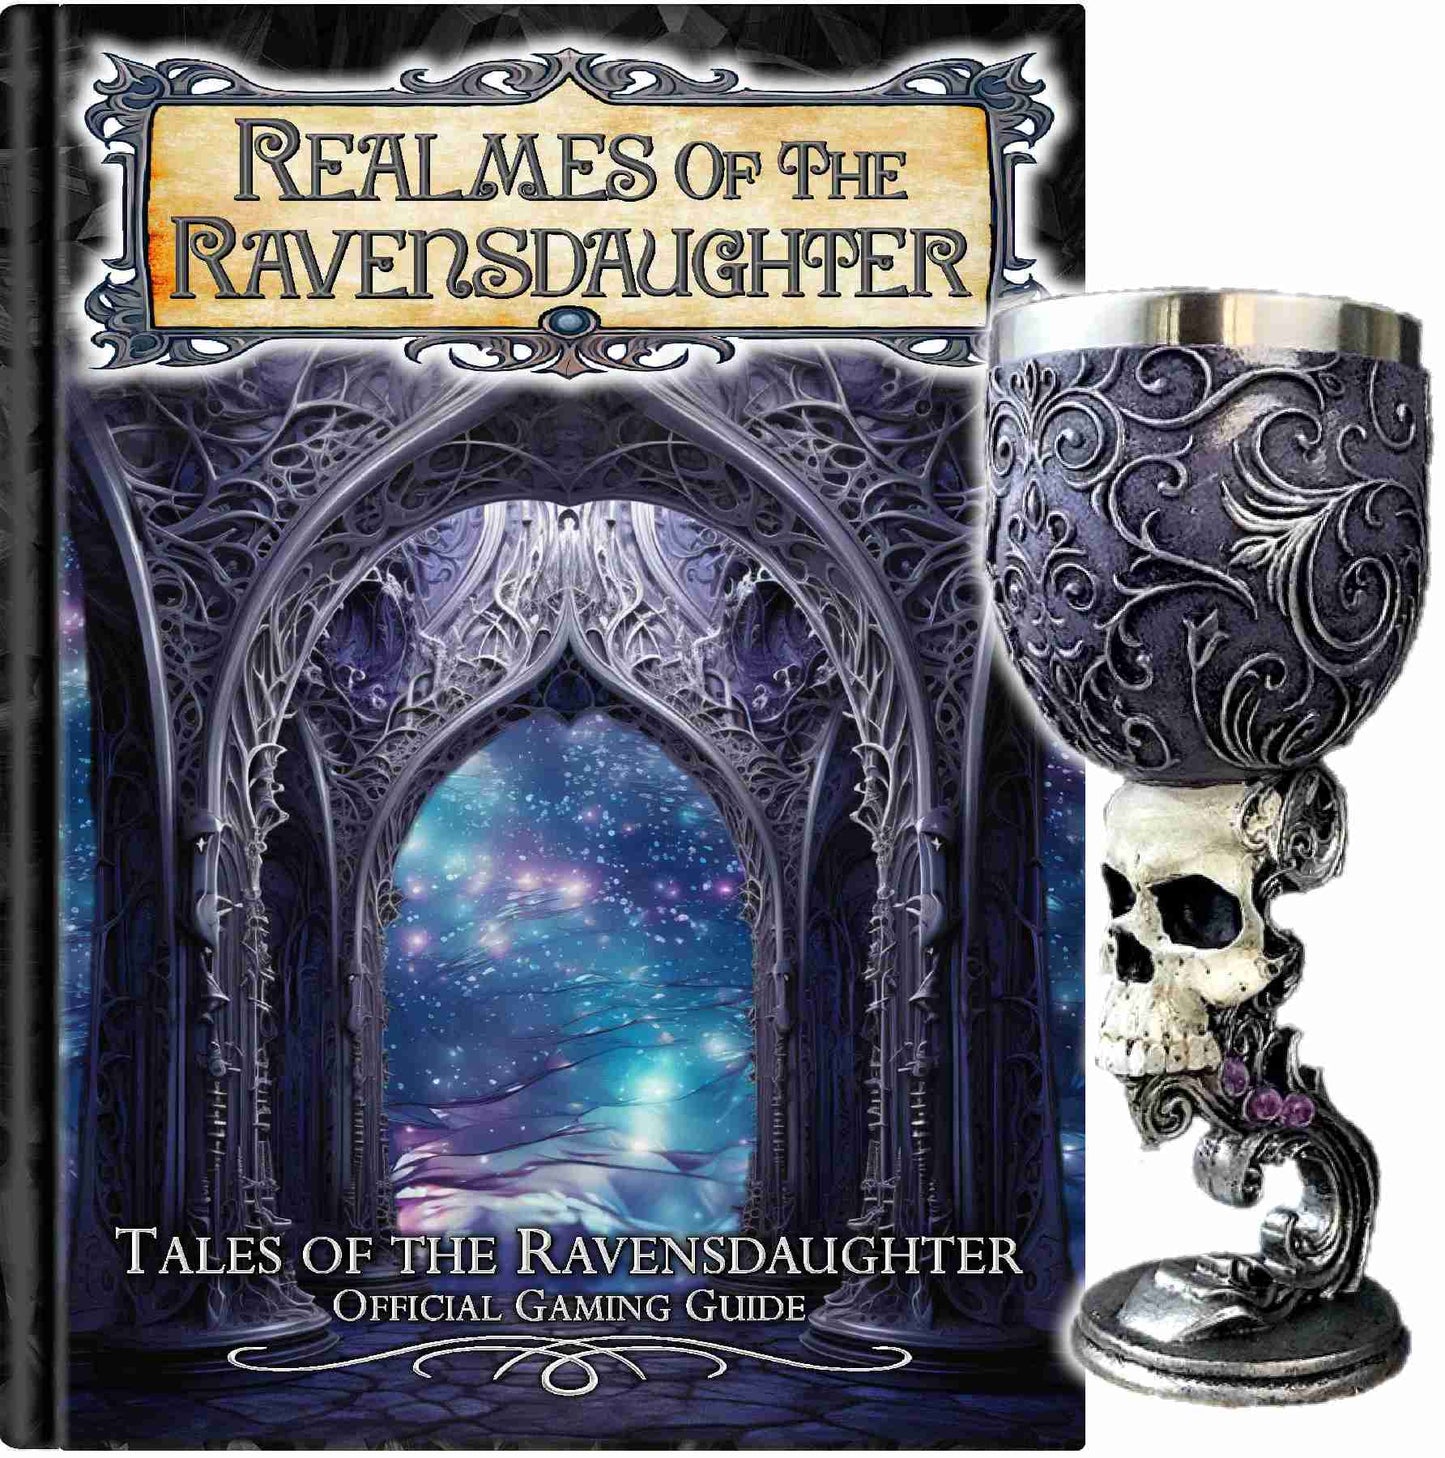 Realmes of the Ravensdaughter RPG Guide PREORDER and Realme Chalice